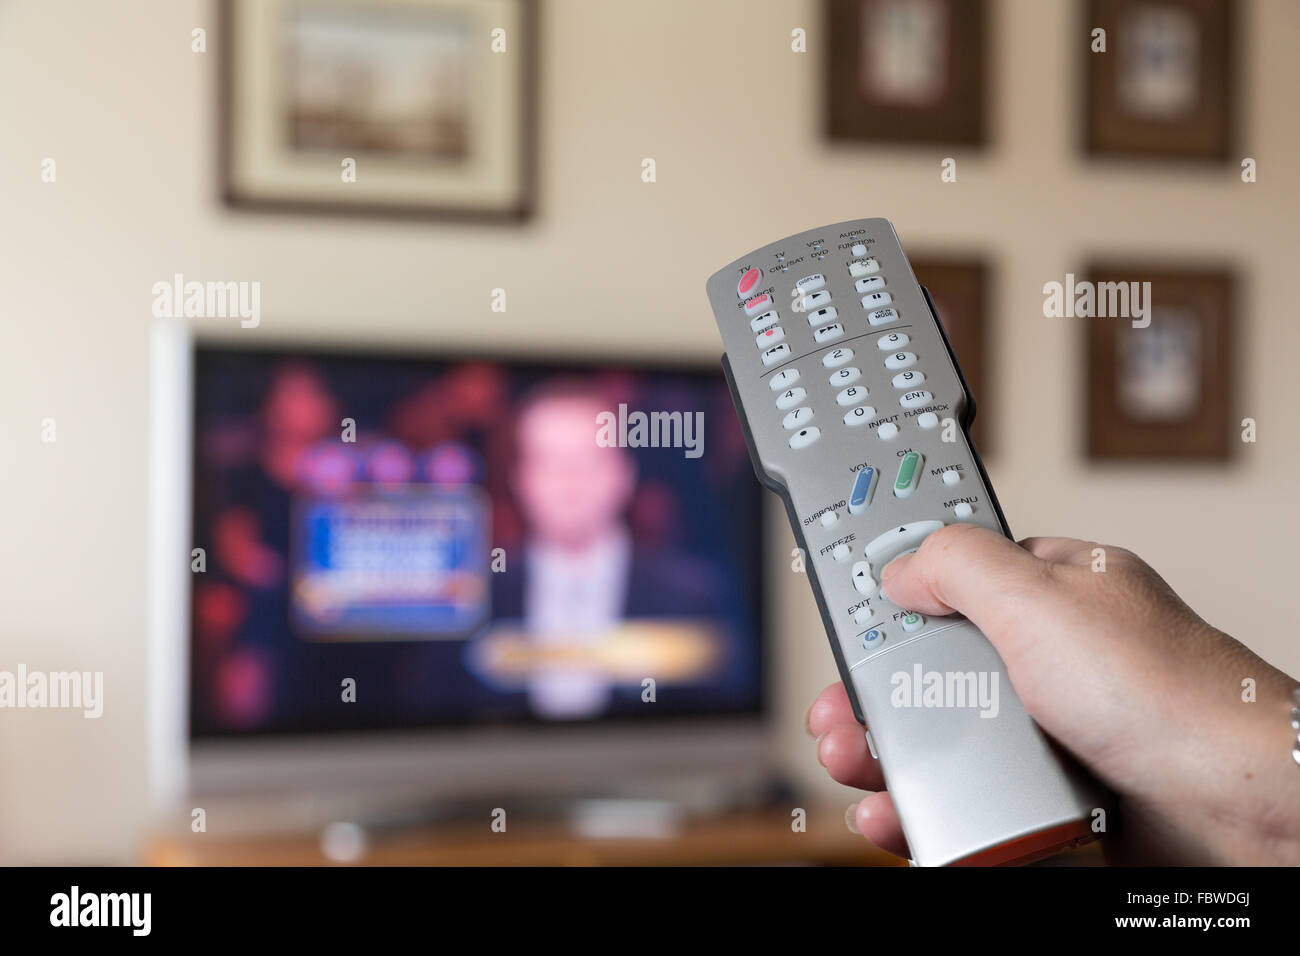 Silver remote control for TV with screen in back Stock Photo